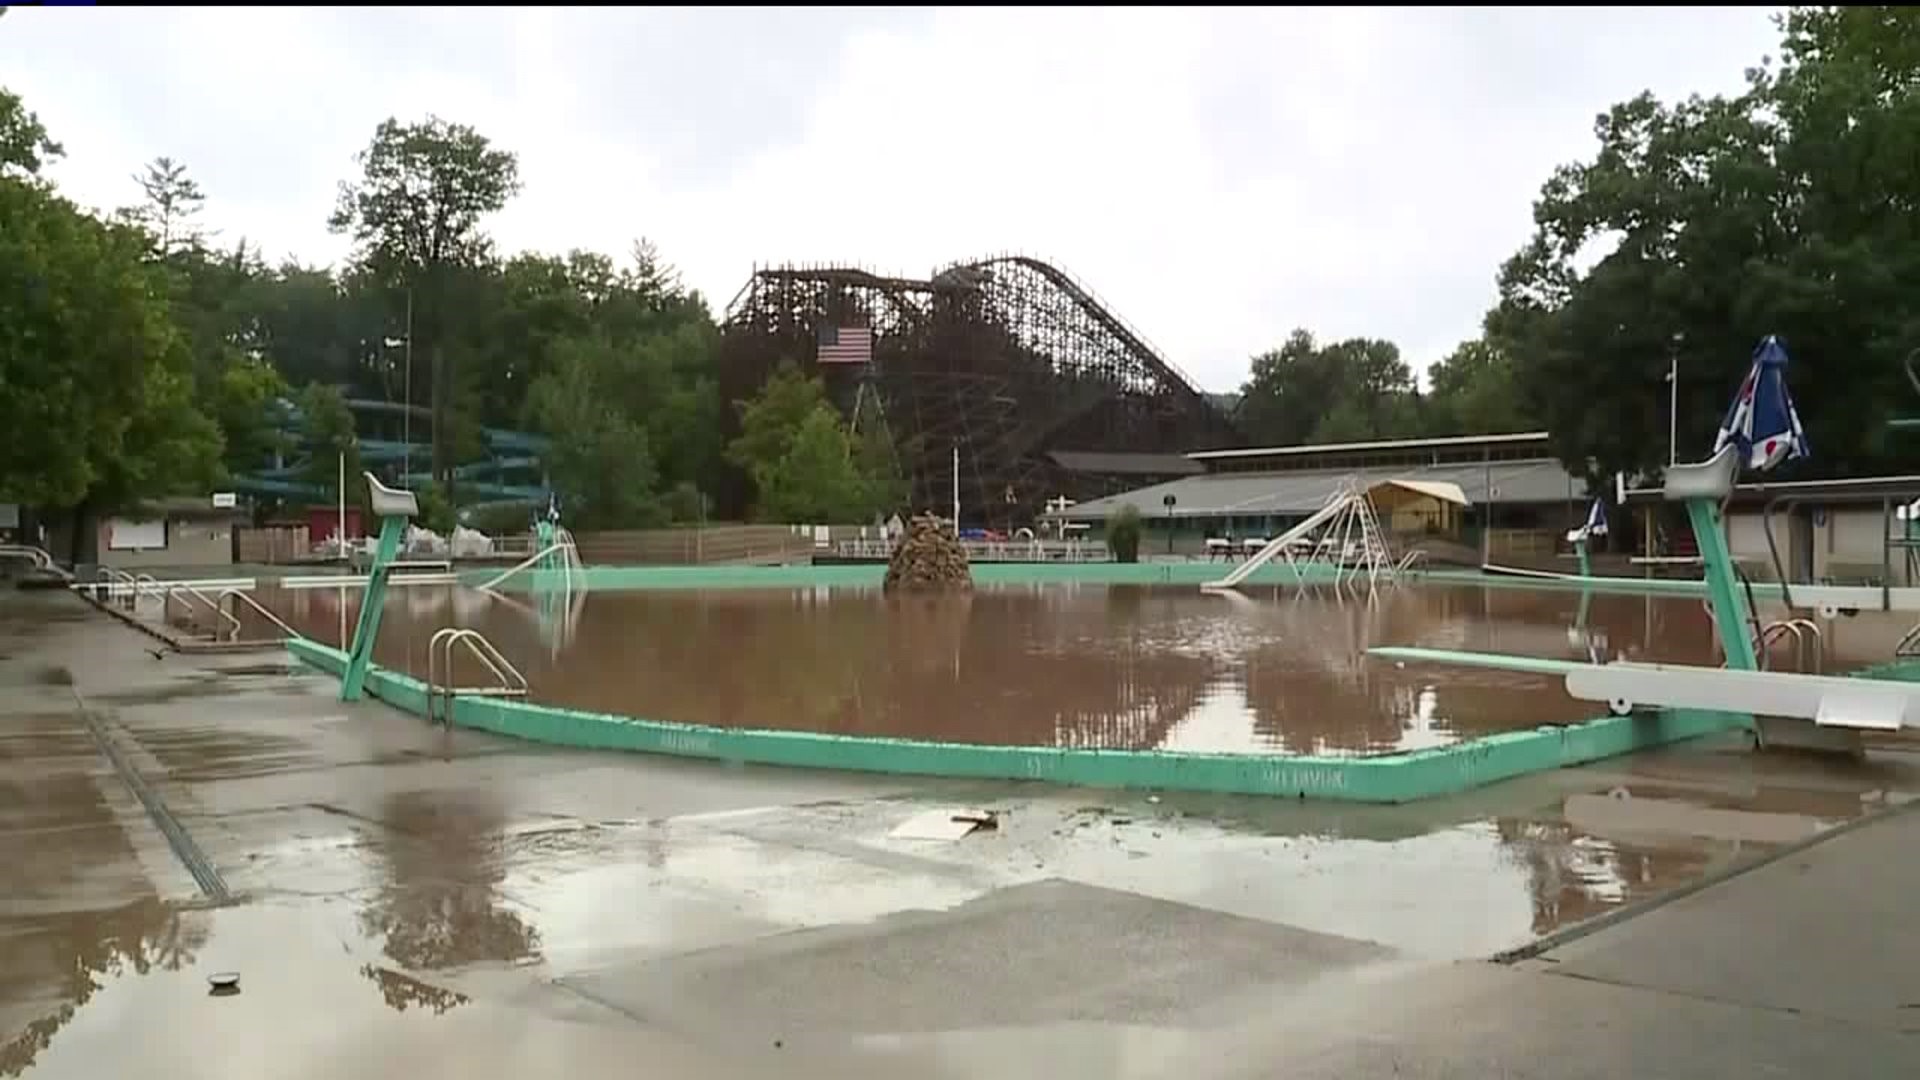 Knoebels Closed Again Due to Flooding